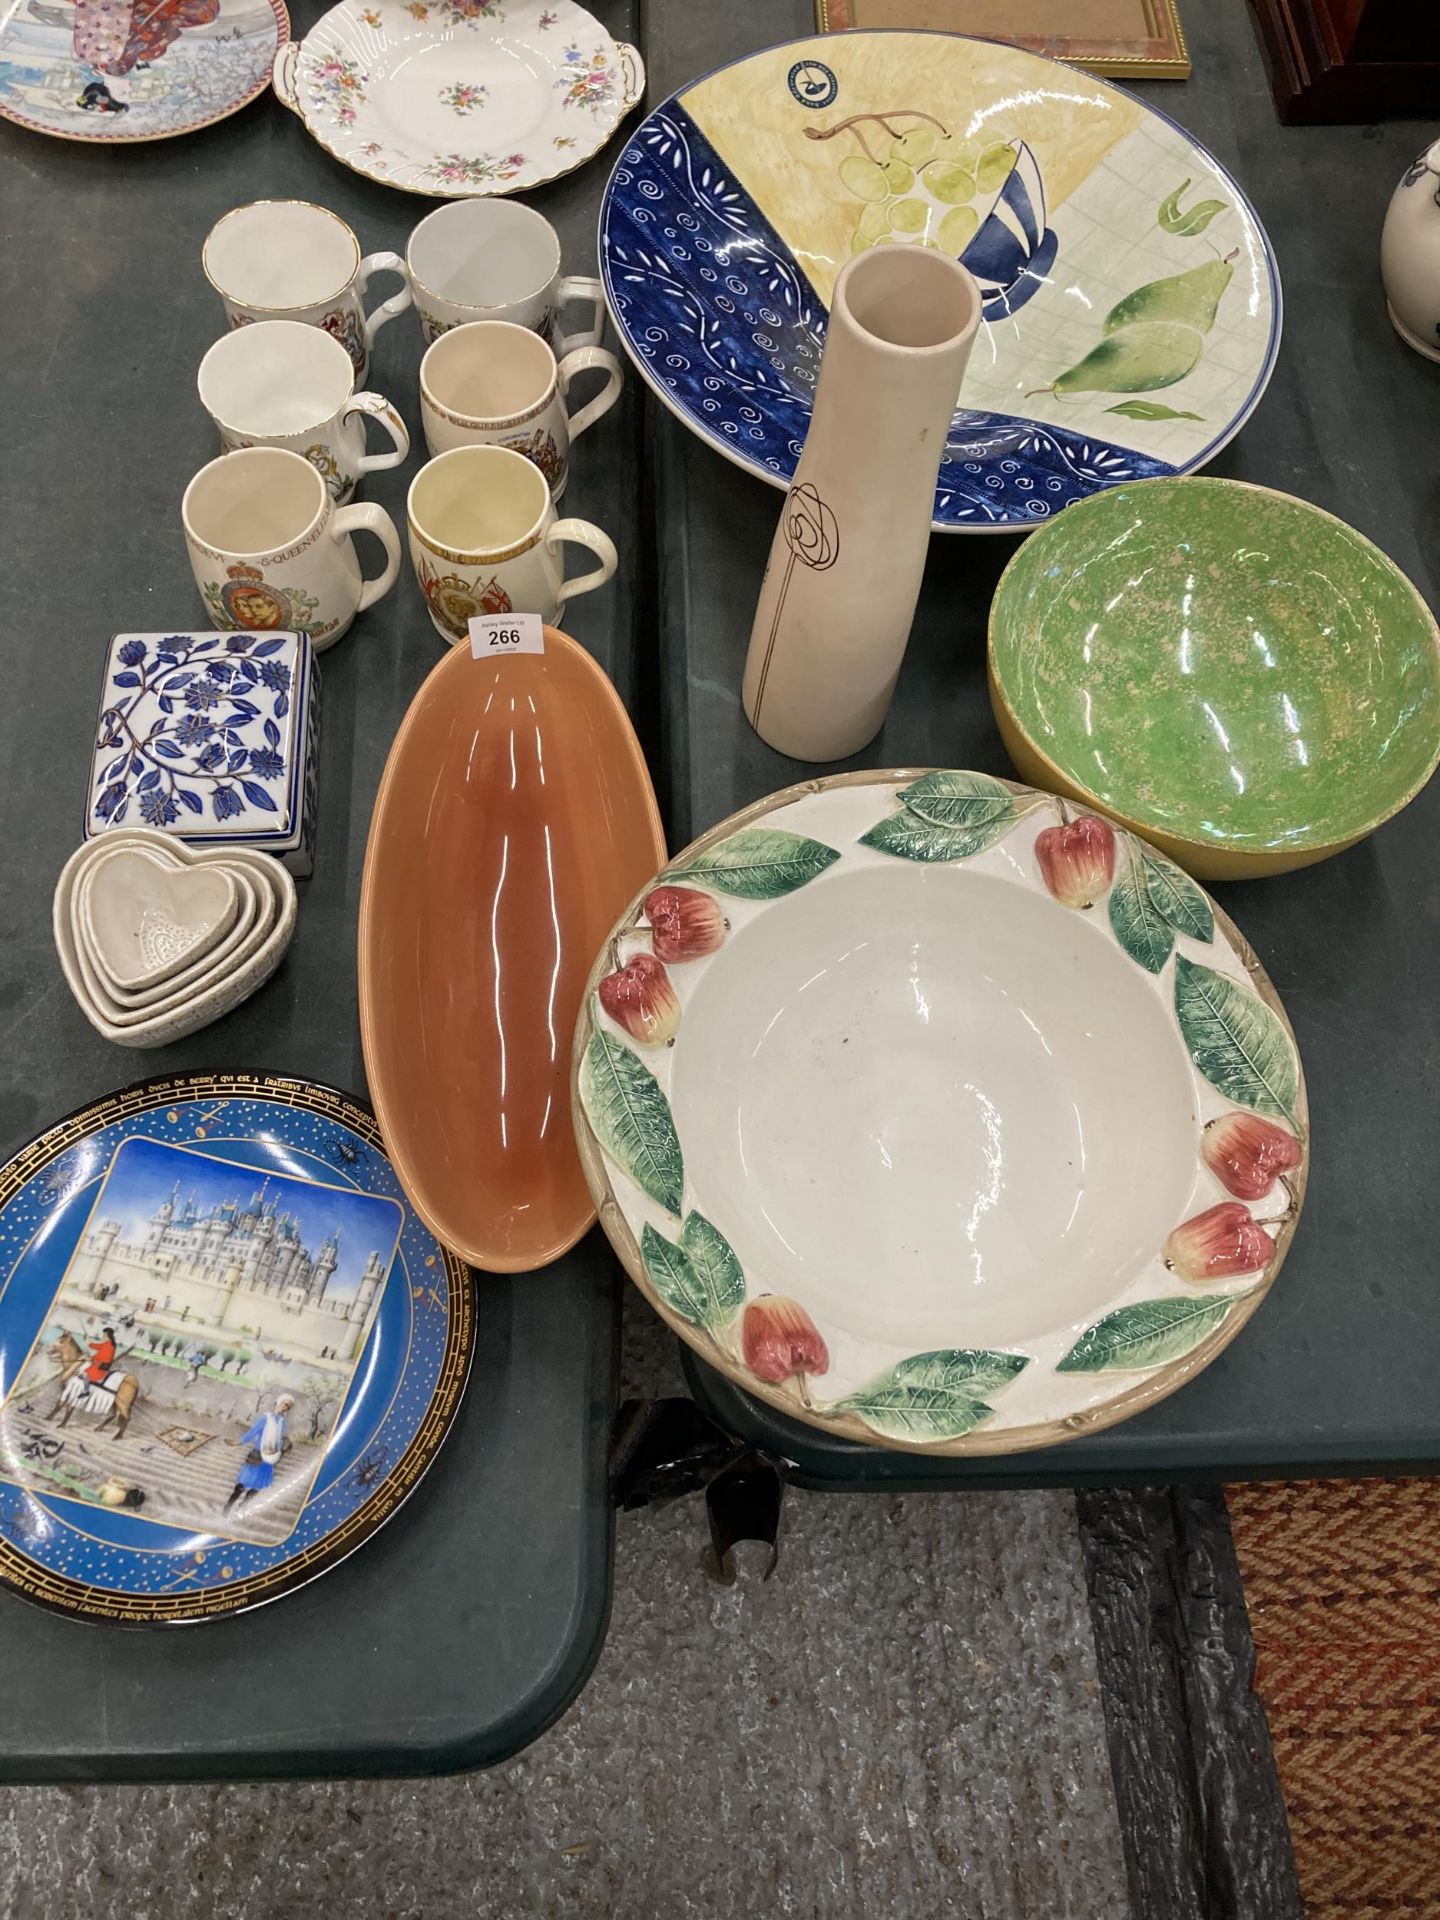 A MIXED LOT TO INCLUDE LARGE CERAMIC FRUIT BOWL, FURTHER BOWLS, COMMEMORATIVE MUGS ETC